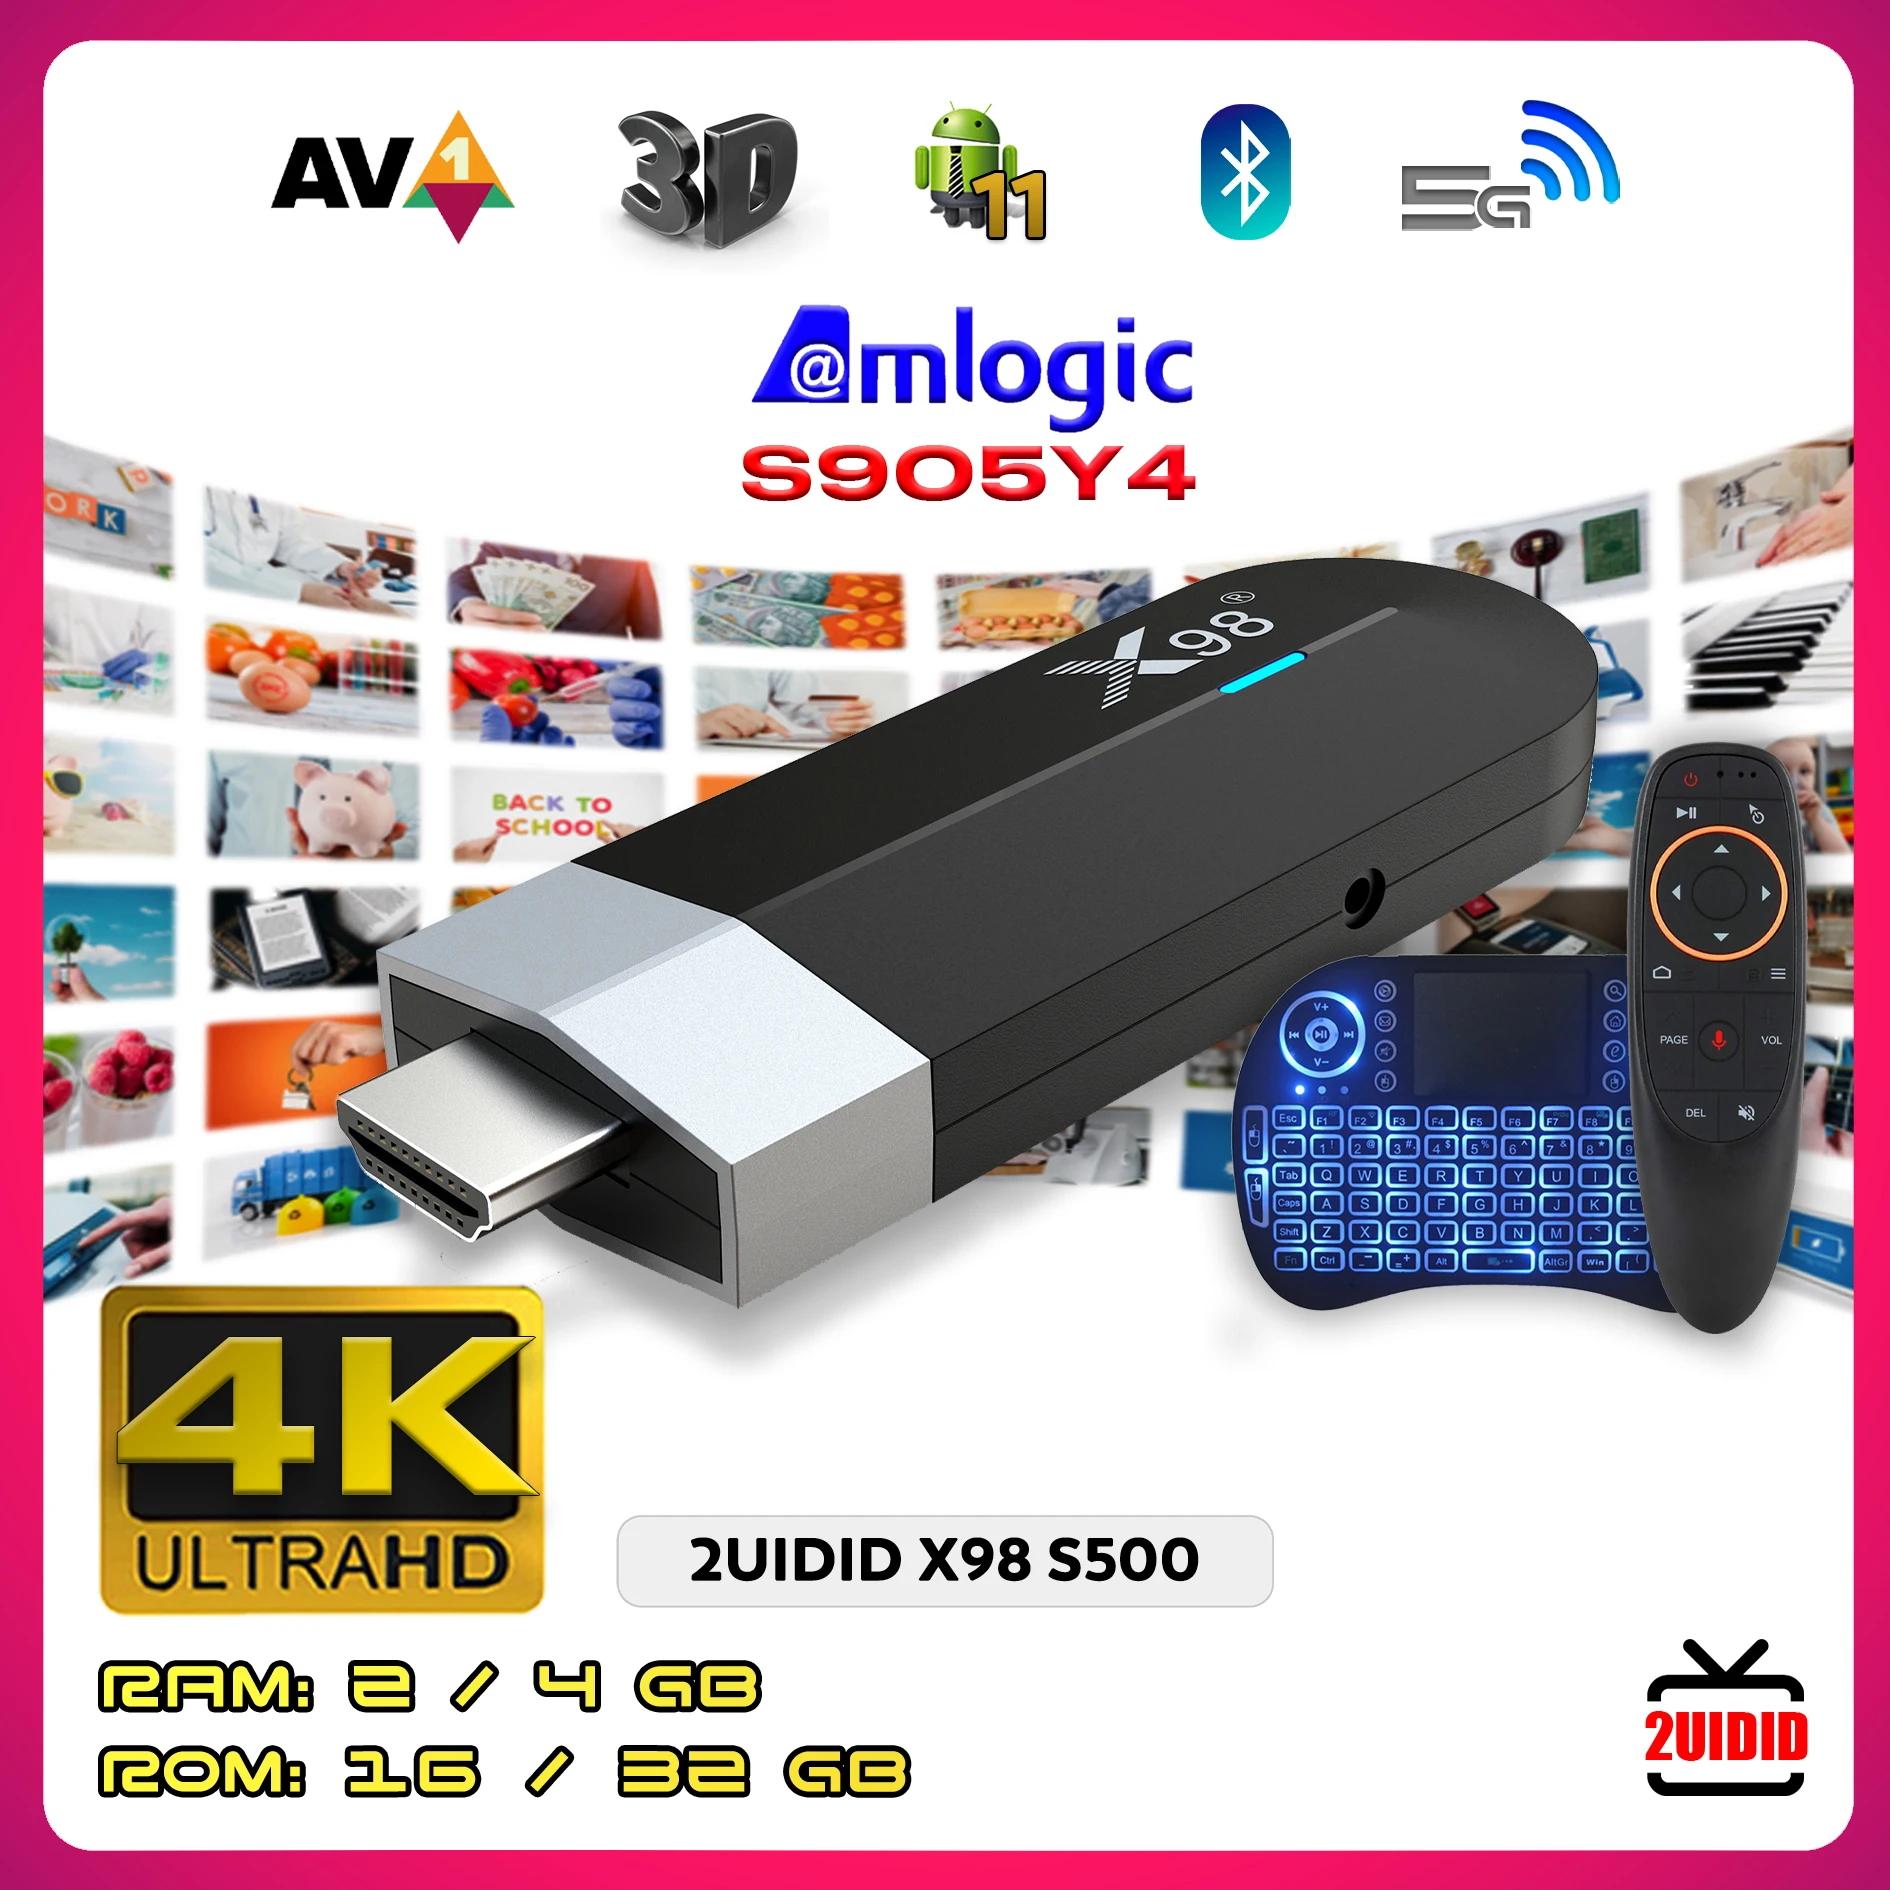 2UIDID X98 S500 Android 11 TV Stick Amlogic S905Y4 Quad Core 4G 32G AV1 4K 60fps 5G Wifi Google Player Youtube X98 Dongle 2G 16G